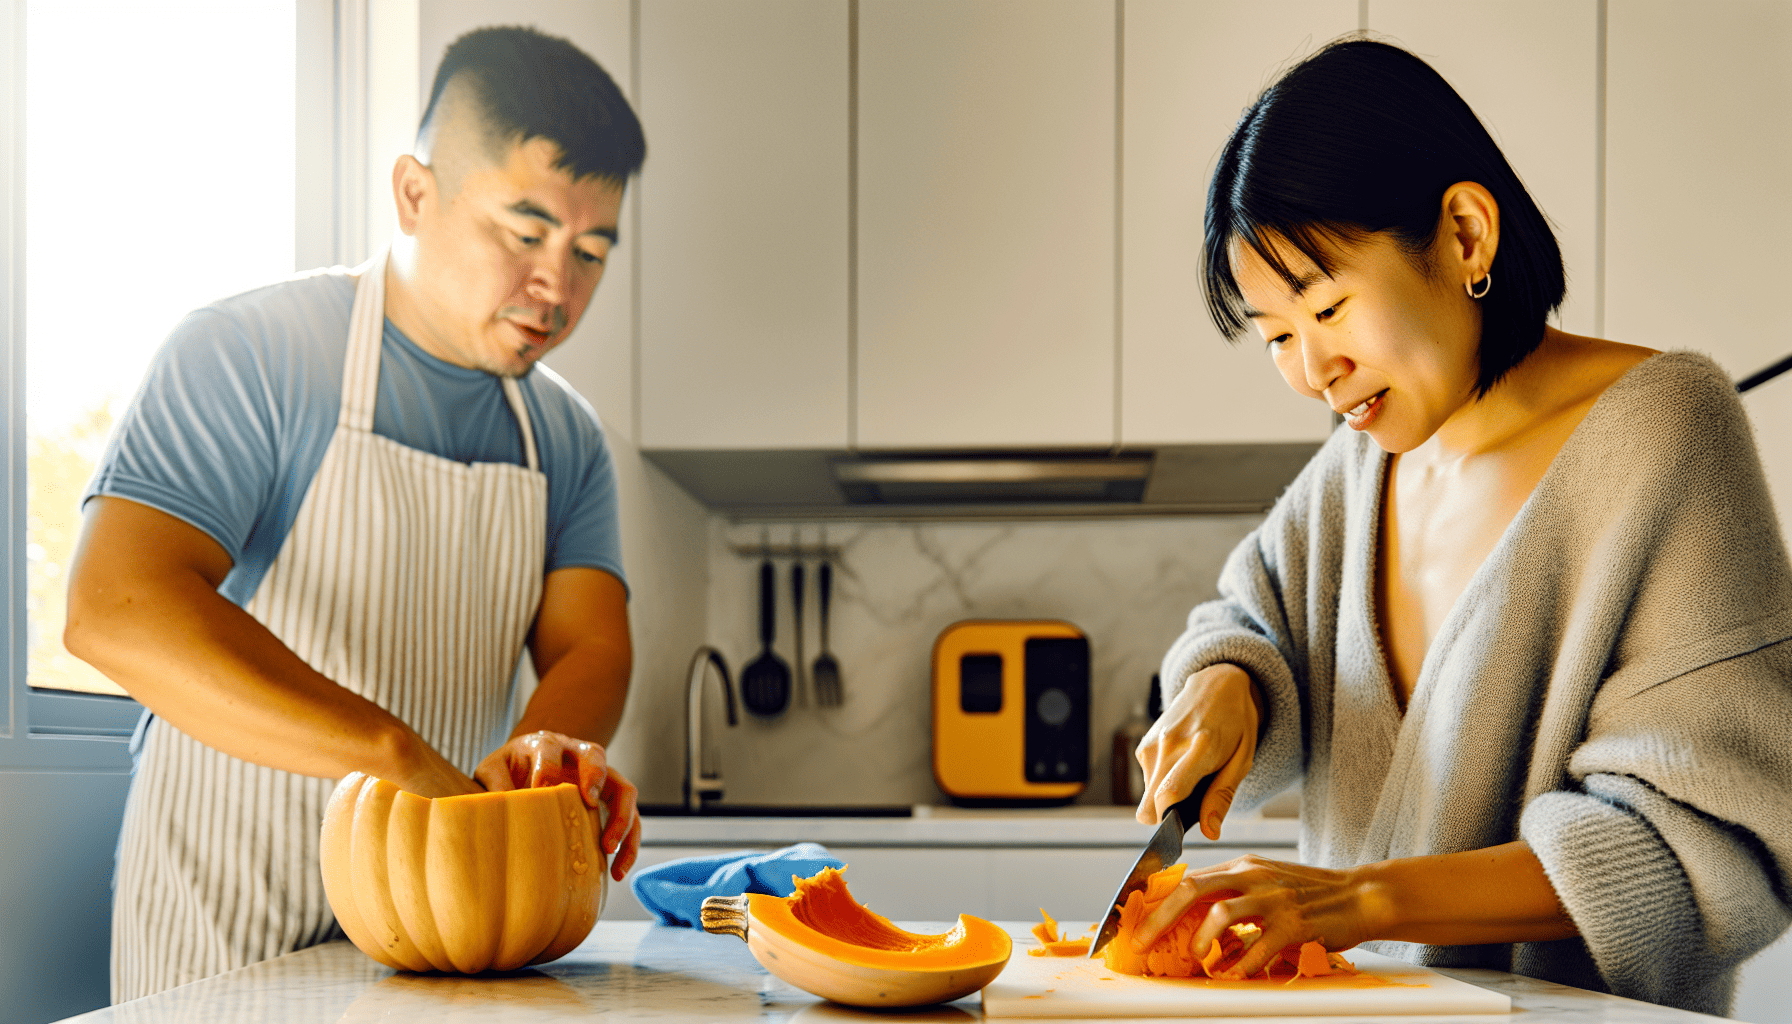 A person preparing butternut squash for cooking